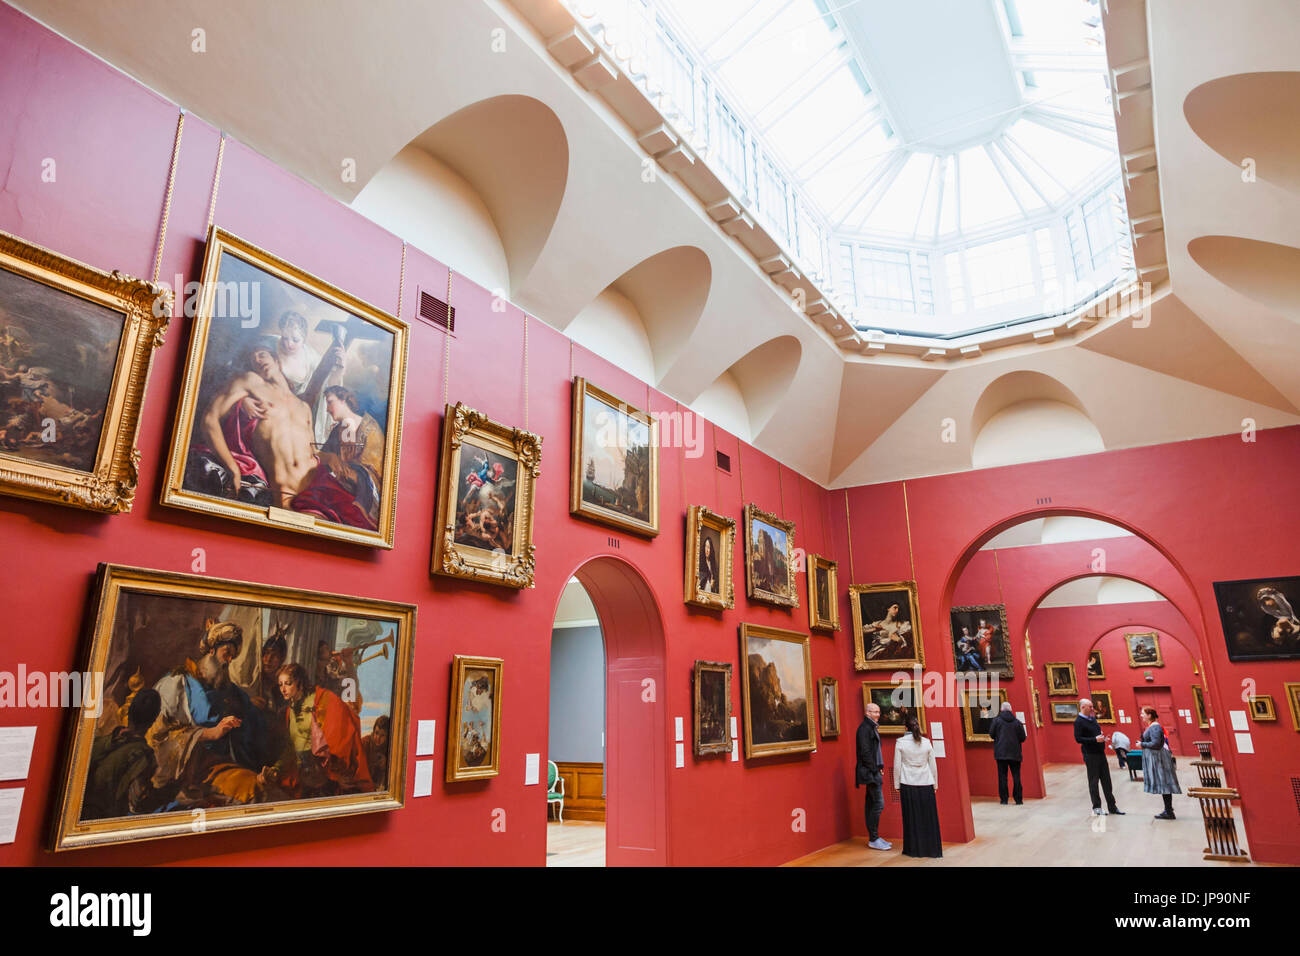 England, London, Dulwich, Dulwich Picture Gallery, Interior View Stock Photo